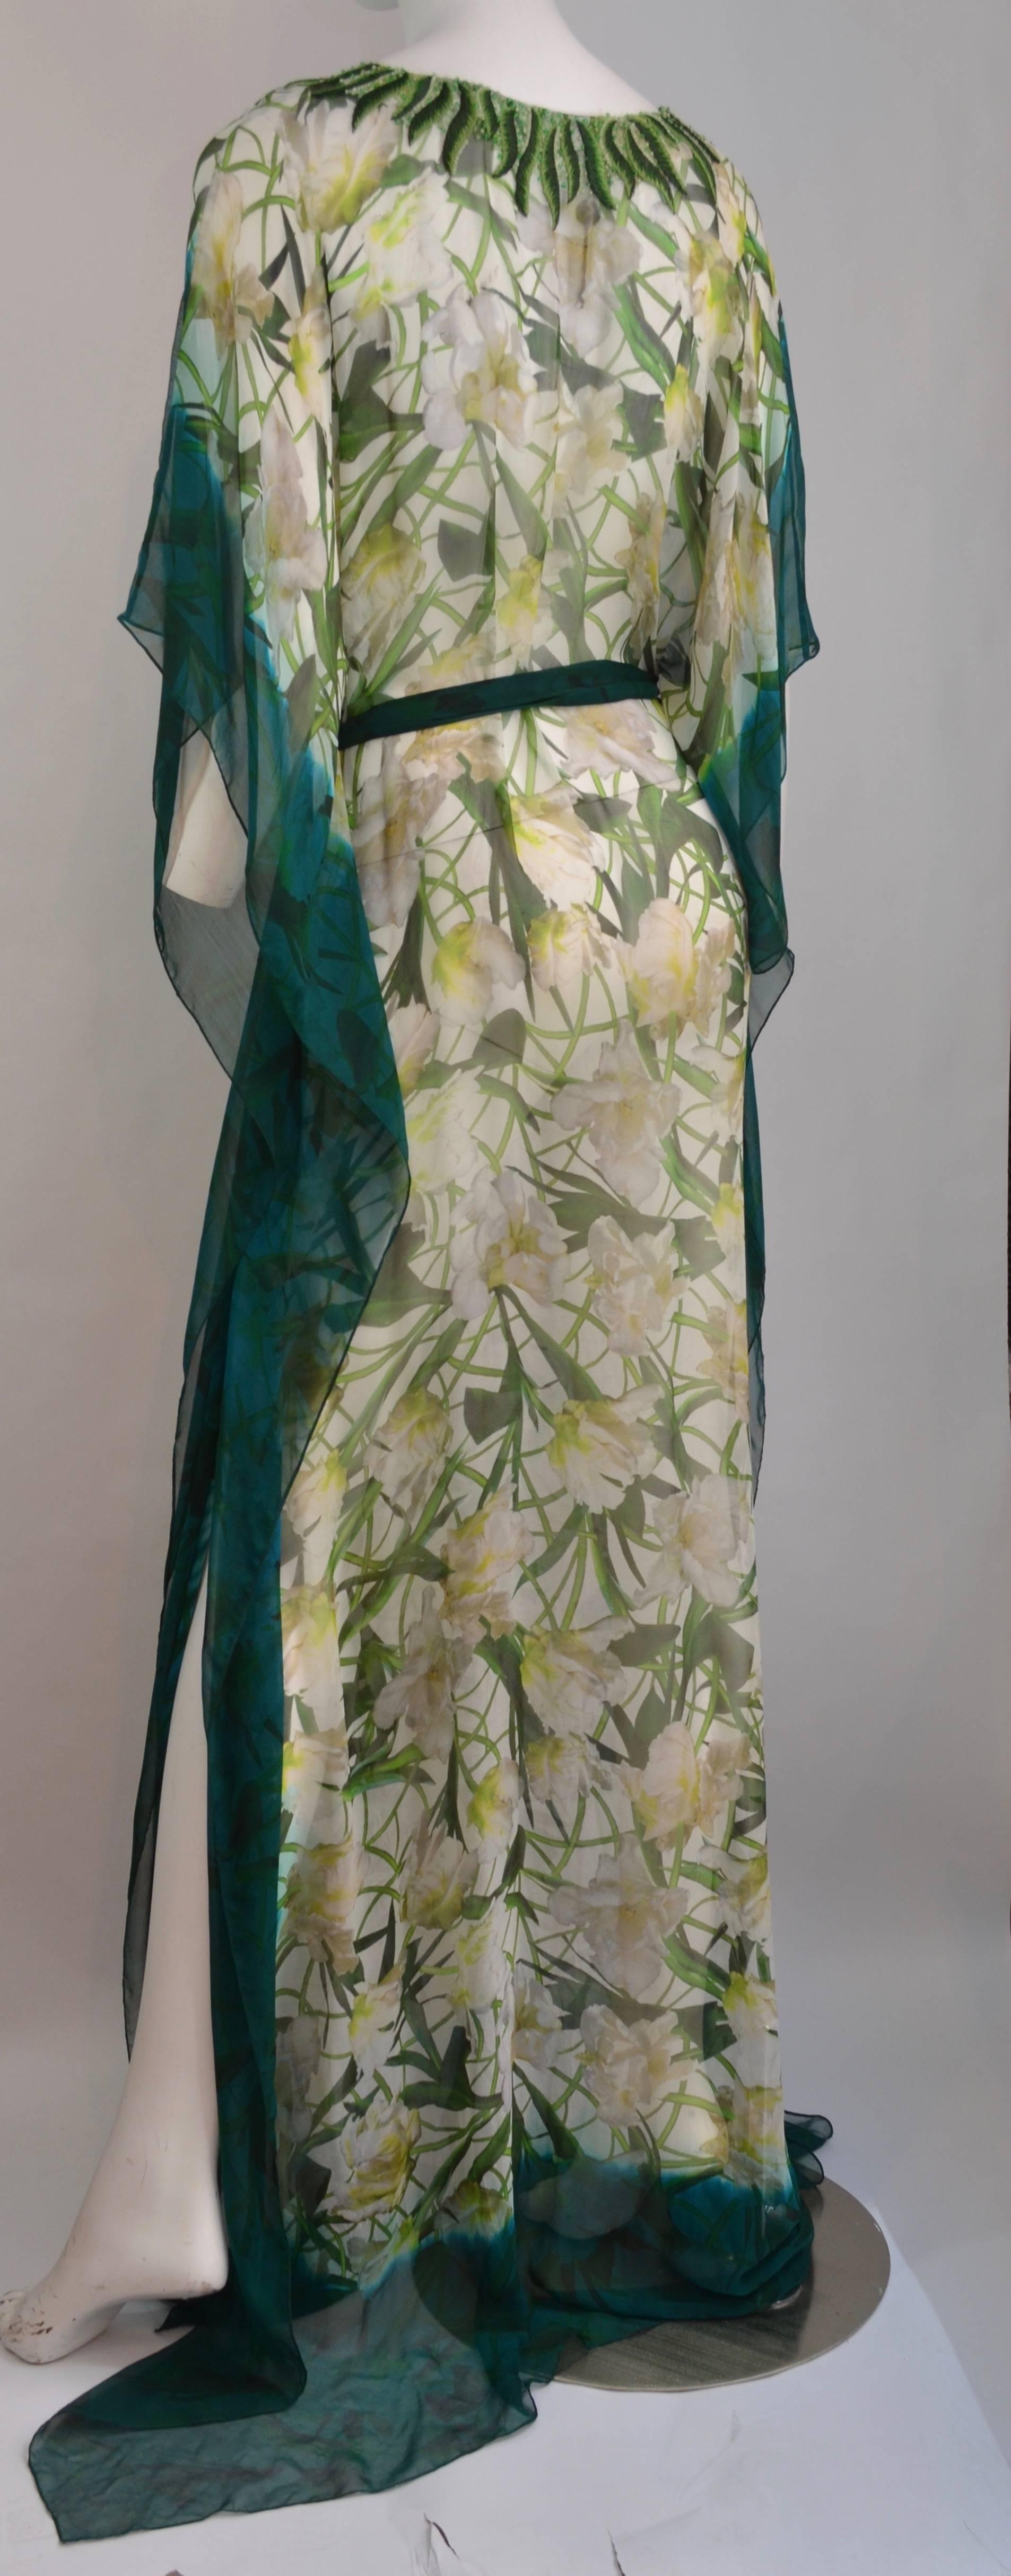 Oscar de la Renta bias cut sheer silk chiffon caftan / Kaftan with white freesia floral print and jade blue-green borders.  The neckline is embroidered with leaves and accented with seed beads.  The waistline has a matching silk chiffon belt that is